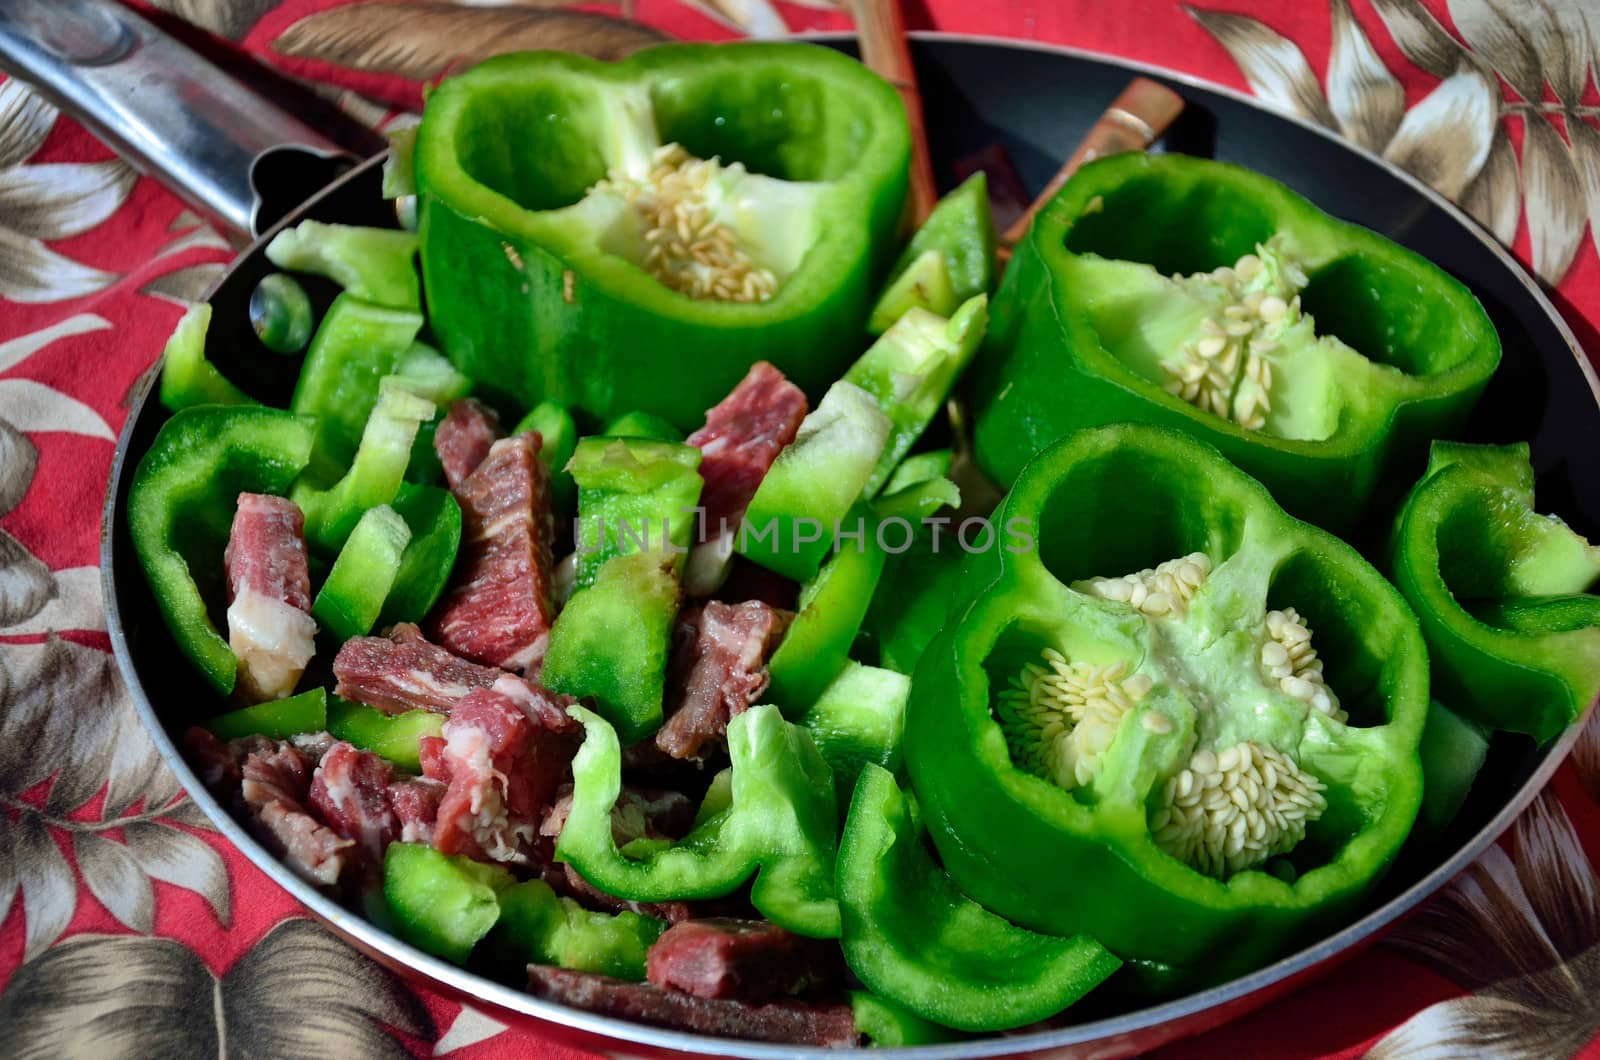 Green peppers and beef slices by jackie@debuskphoto.com